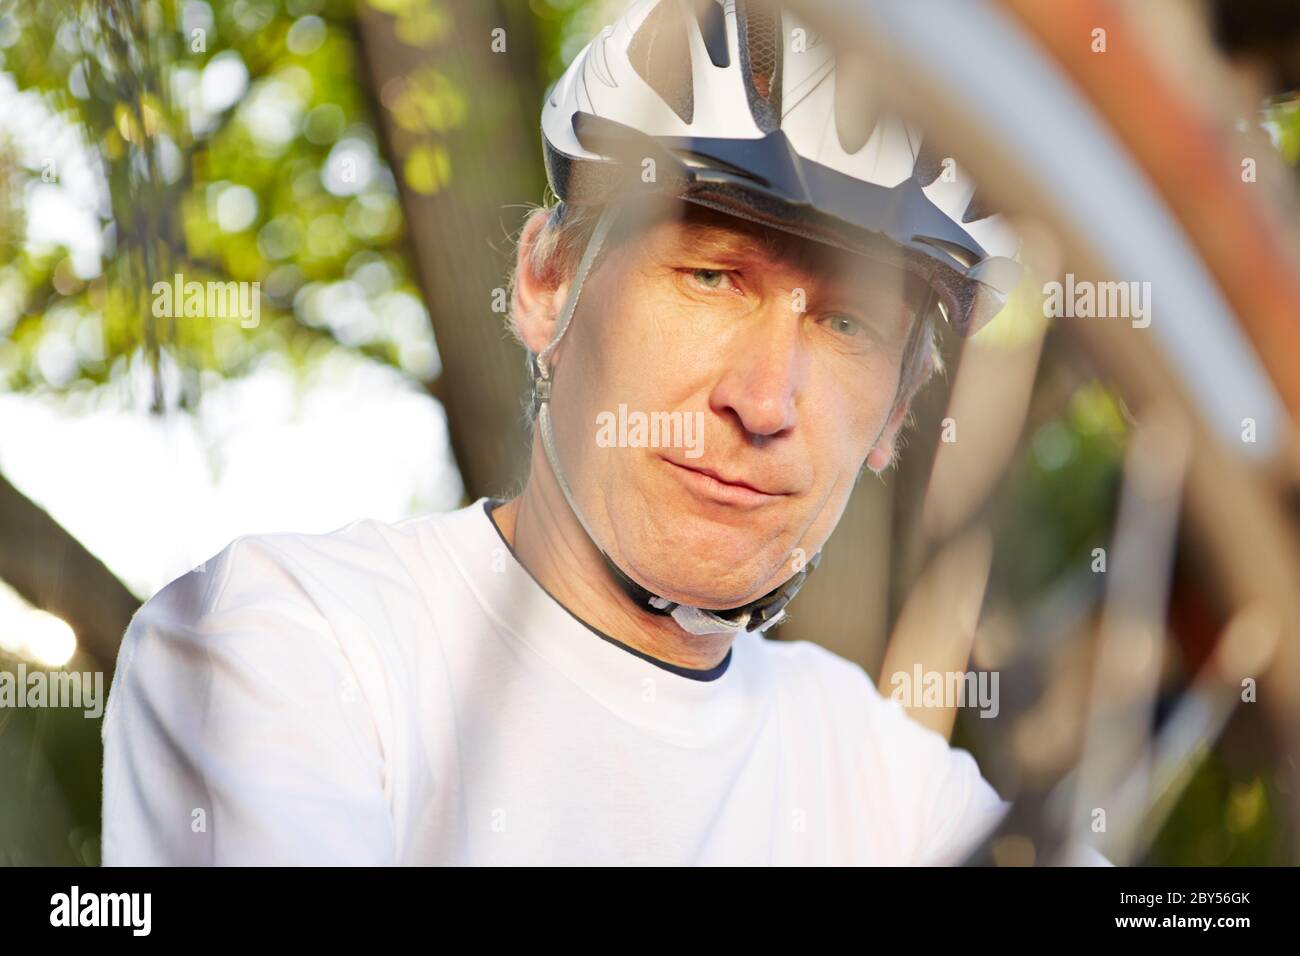 Man with wheel and flat tire repairs his bike Stock Photo